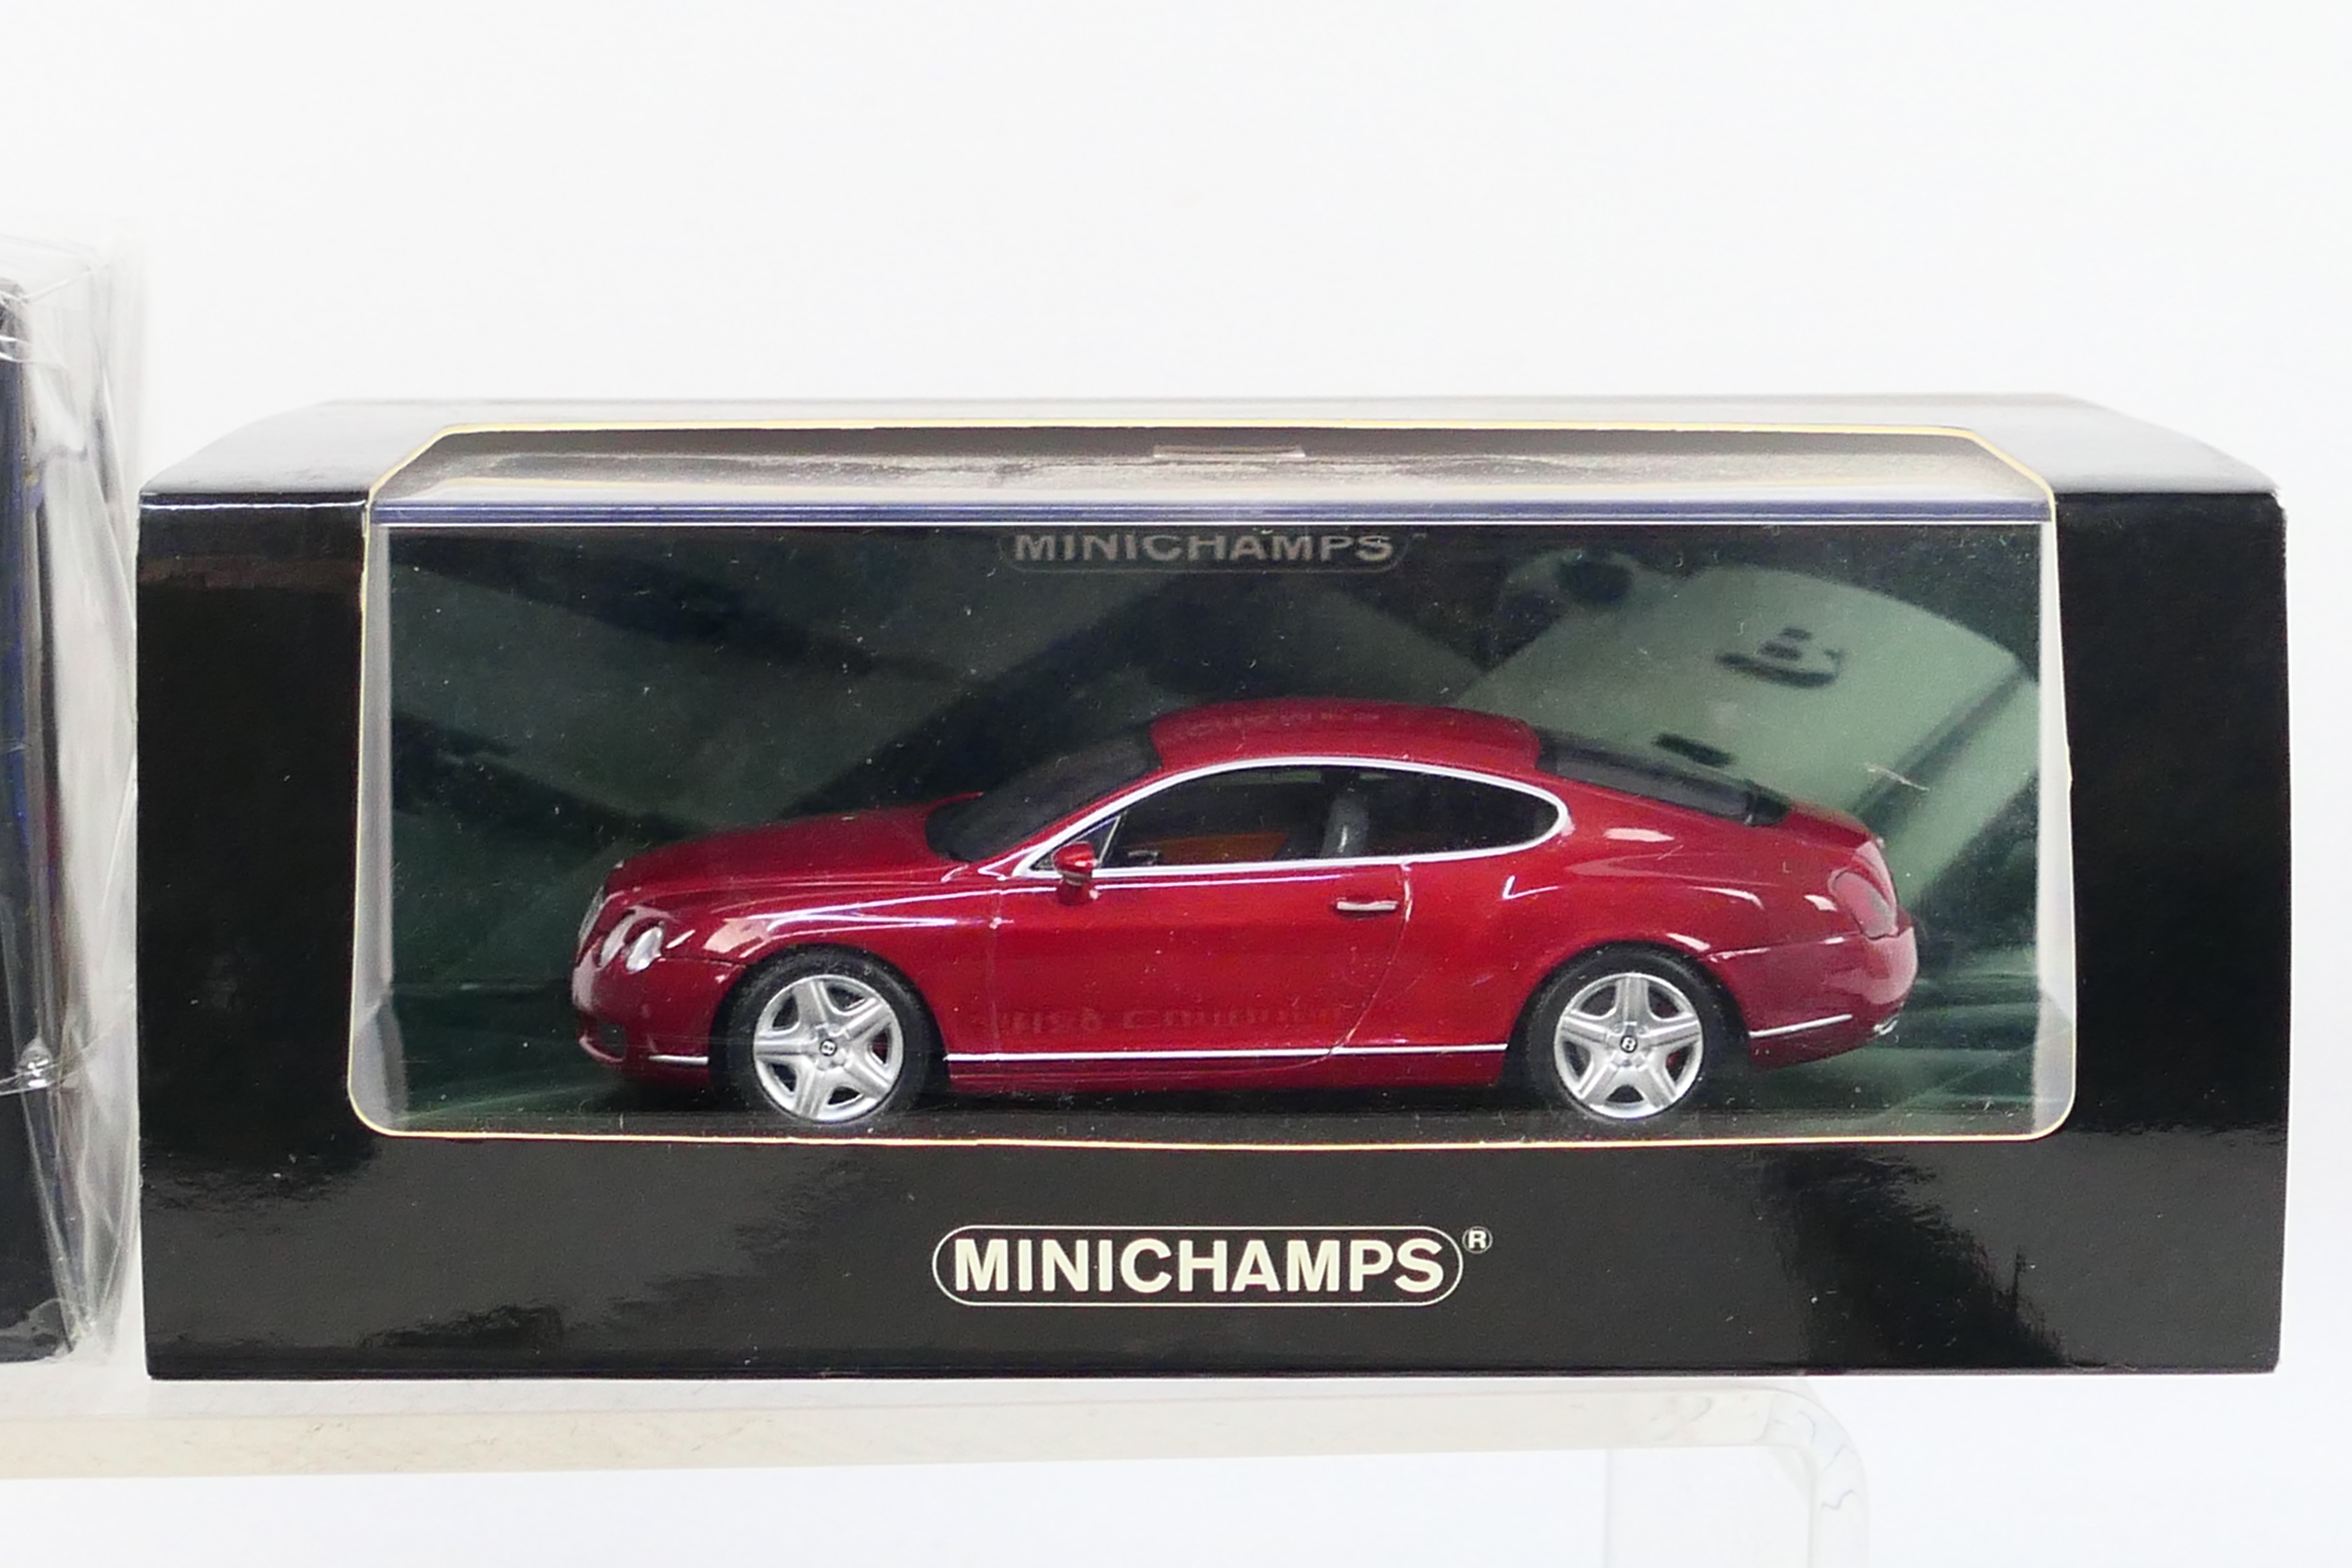 Minichamps - Norev - Four boxed 1:43 scale diecast model cars. - Image 3 of 5